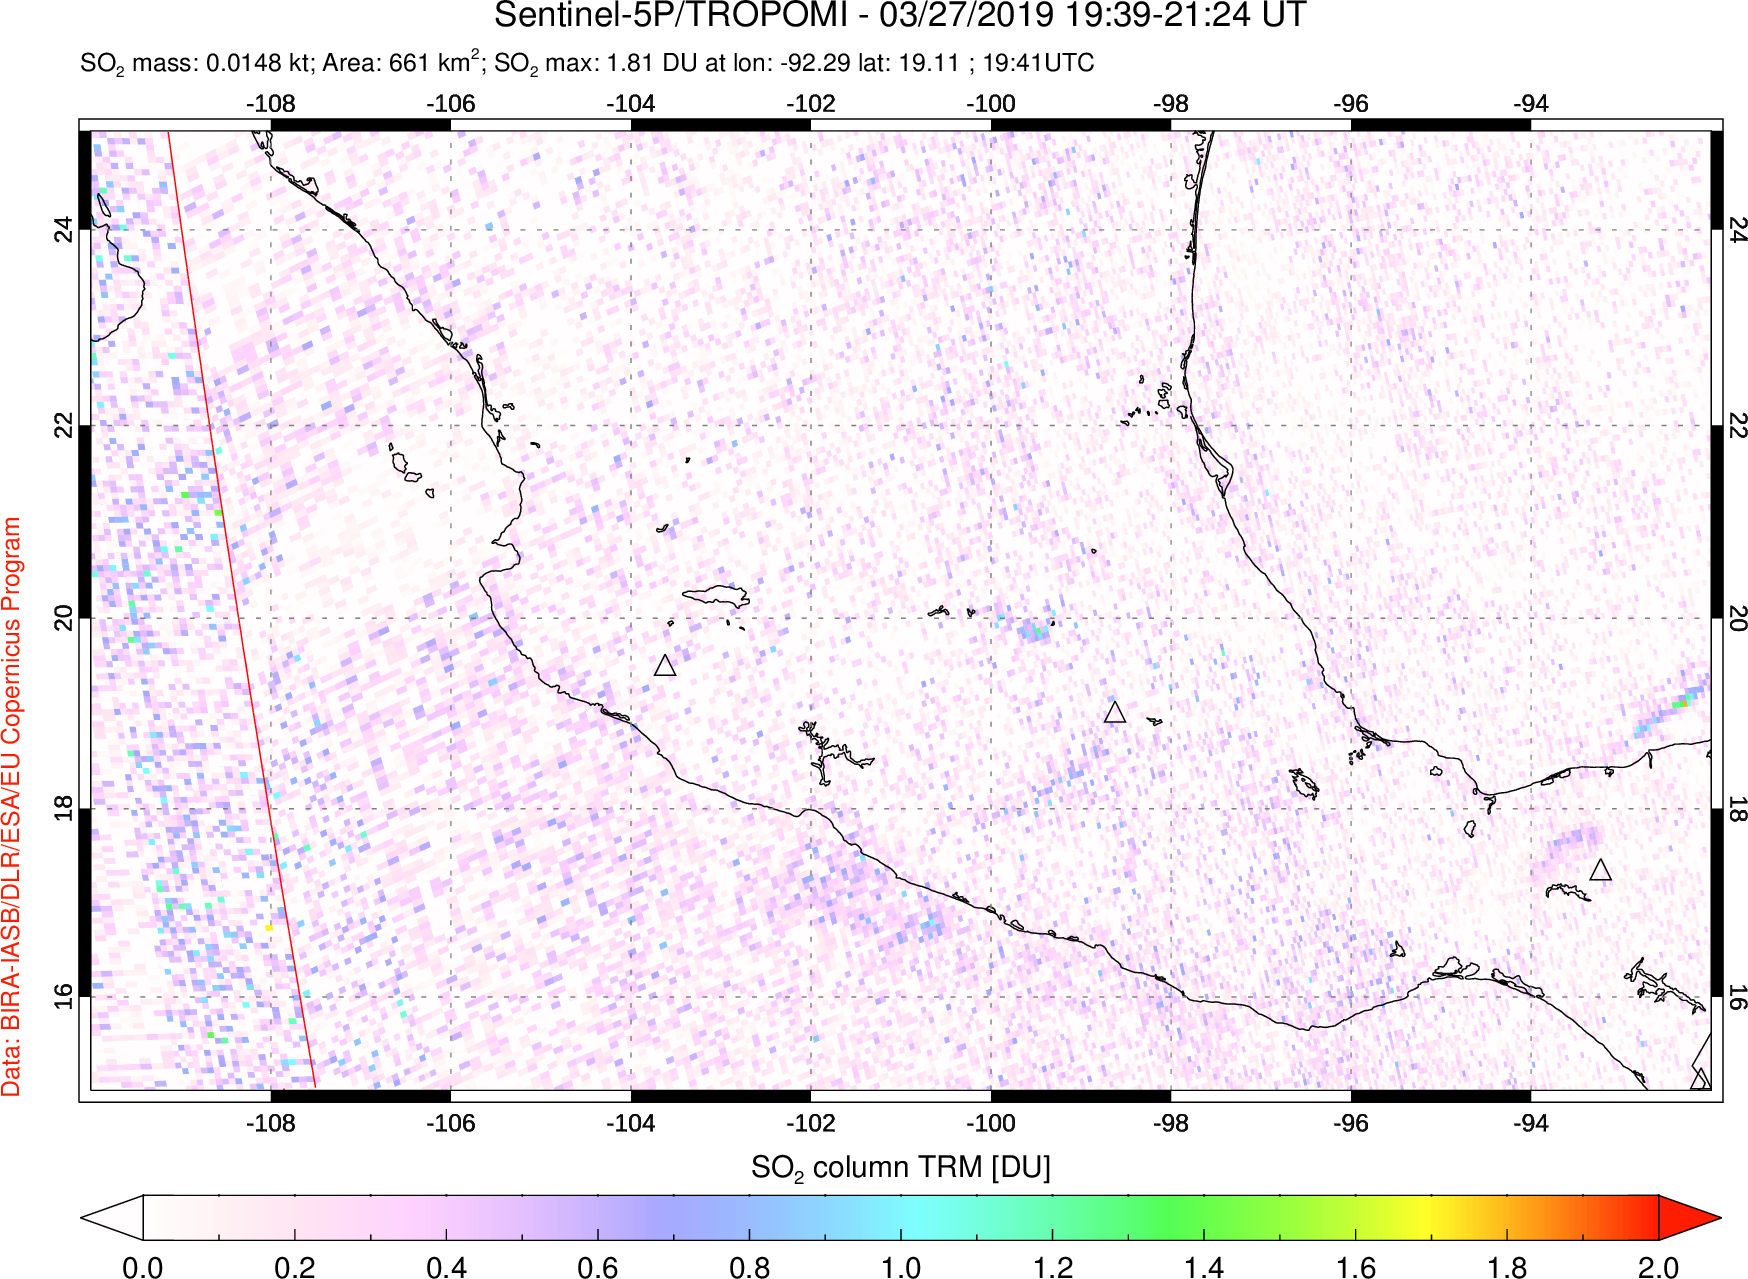 A sulfur dioxide image over Mexico on Mar 27, 2019.